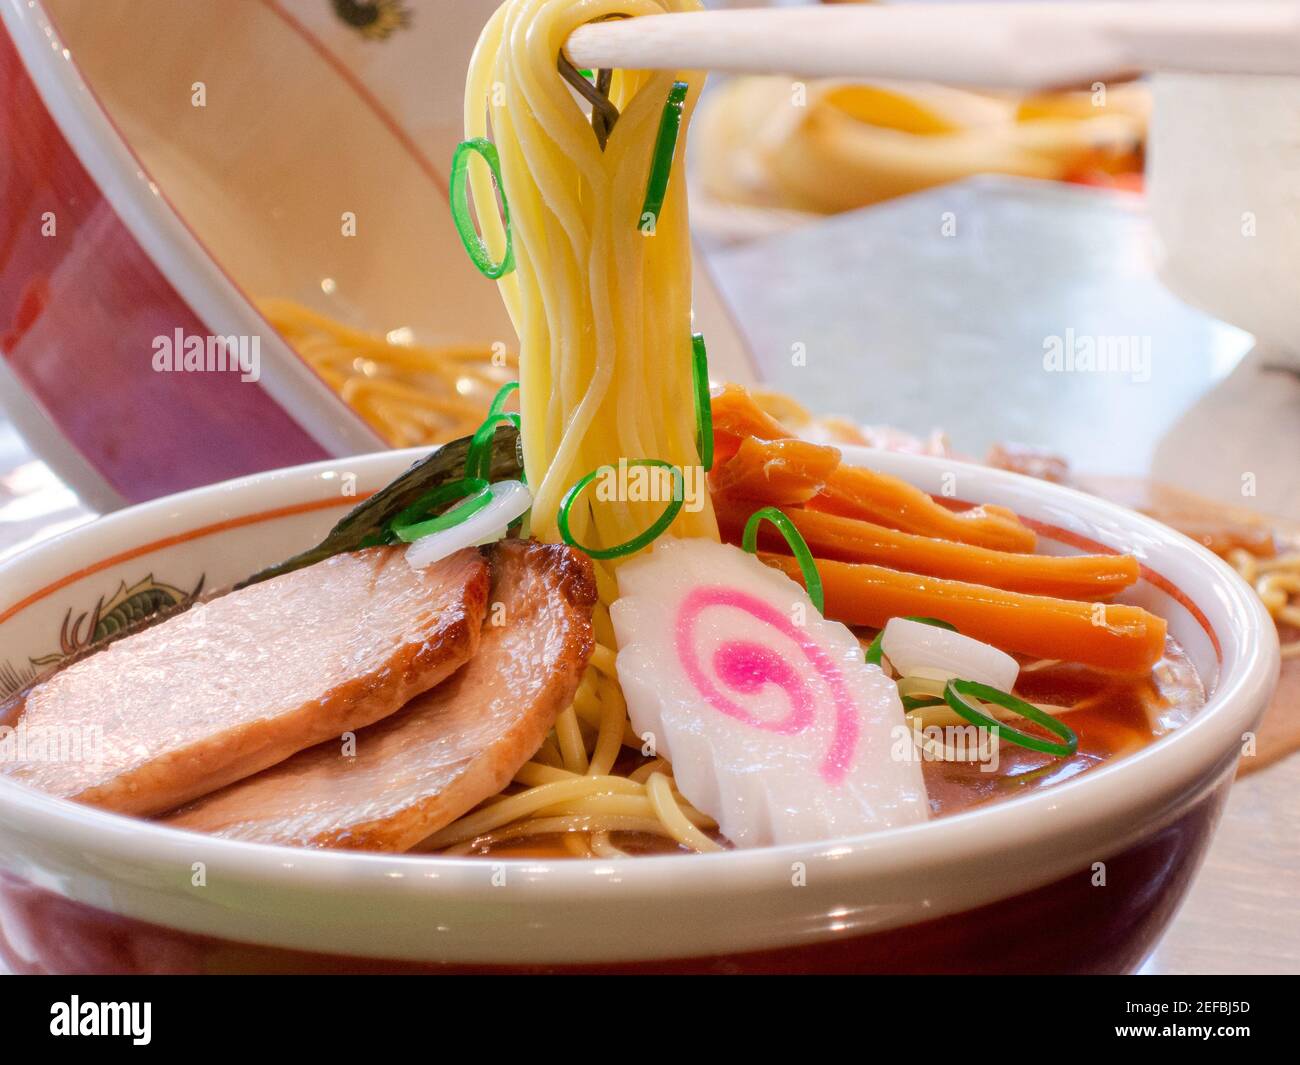 https://c8.alamy.com/comp/2EFBJ5D/fake-food-sample-with-ramen-noodlesfood-sample-in-japan-is-a-traiditional-culture-that-shop-will-require-manufacturer-to-make-high-qualityas-same-as-2EFBJ5D.jpg